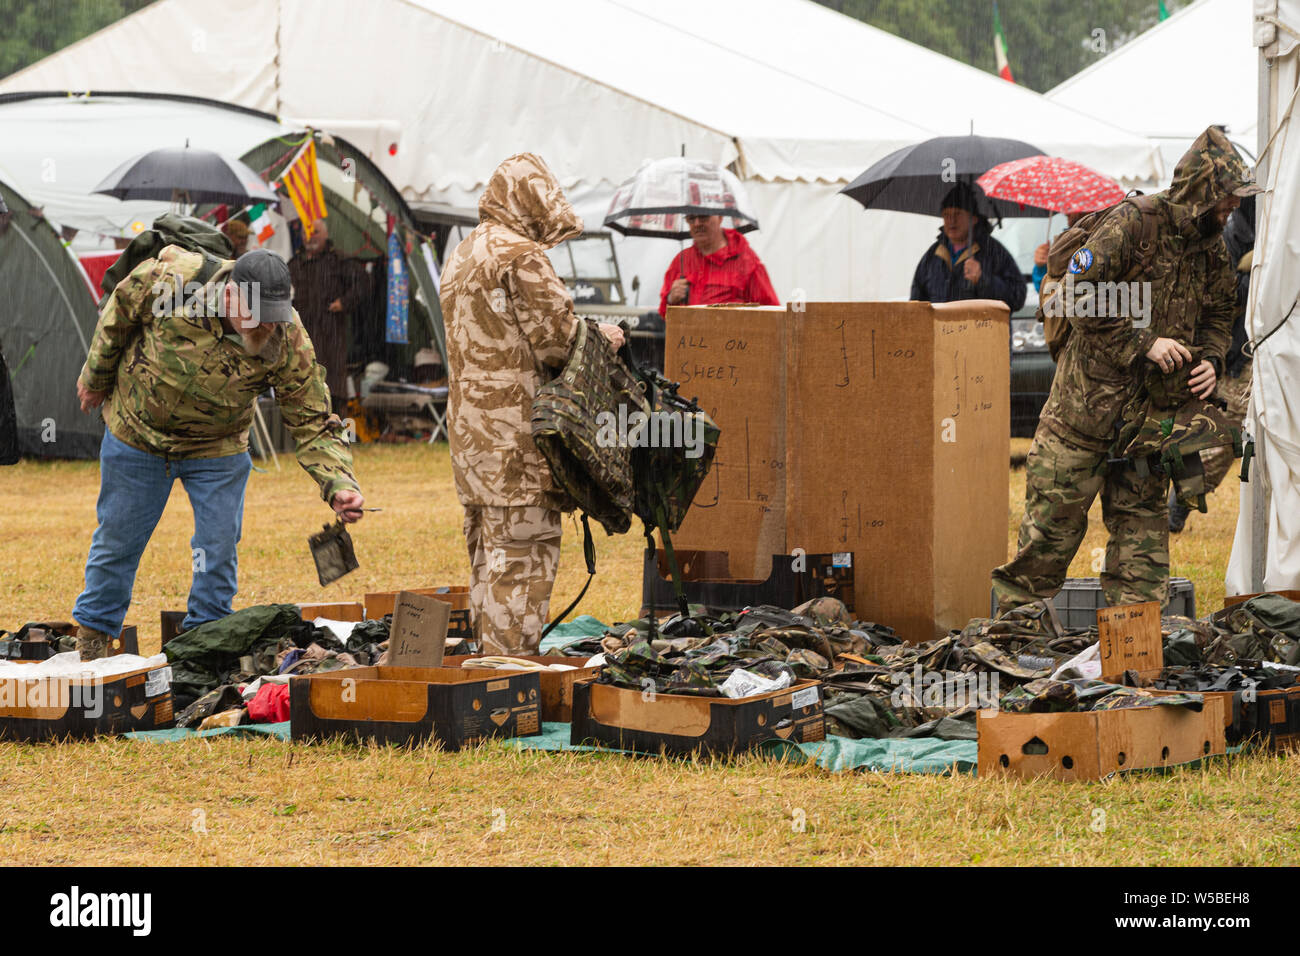 War and Peace Revival 2019, Paddock Wood Hop Farm. People sifting through an Army surplus market stall. Stock Photo